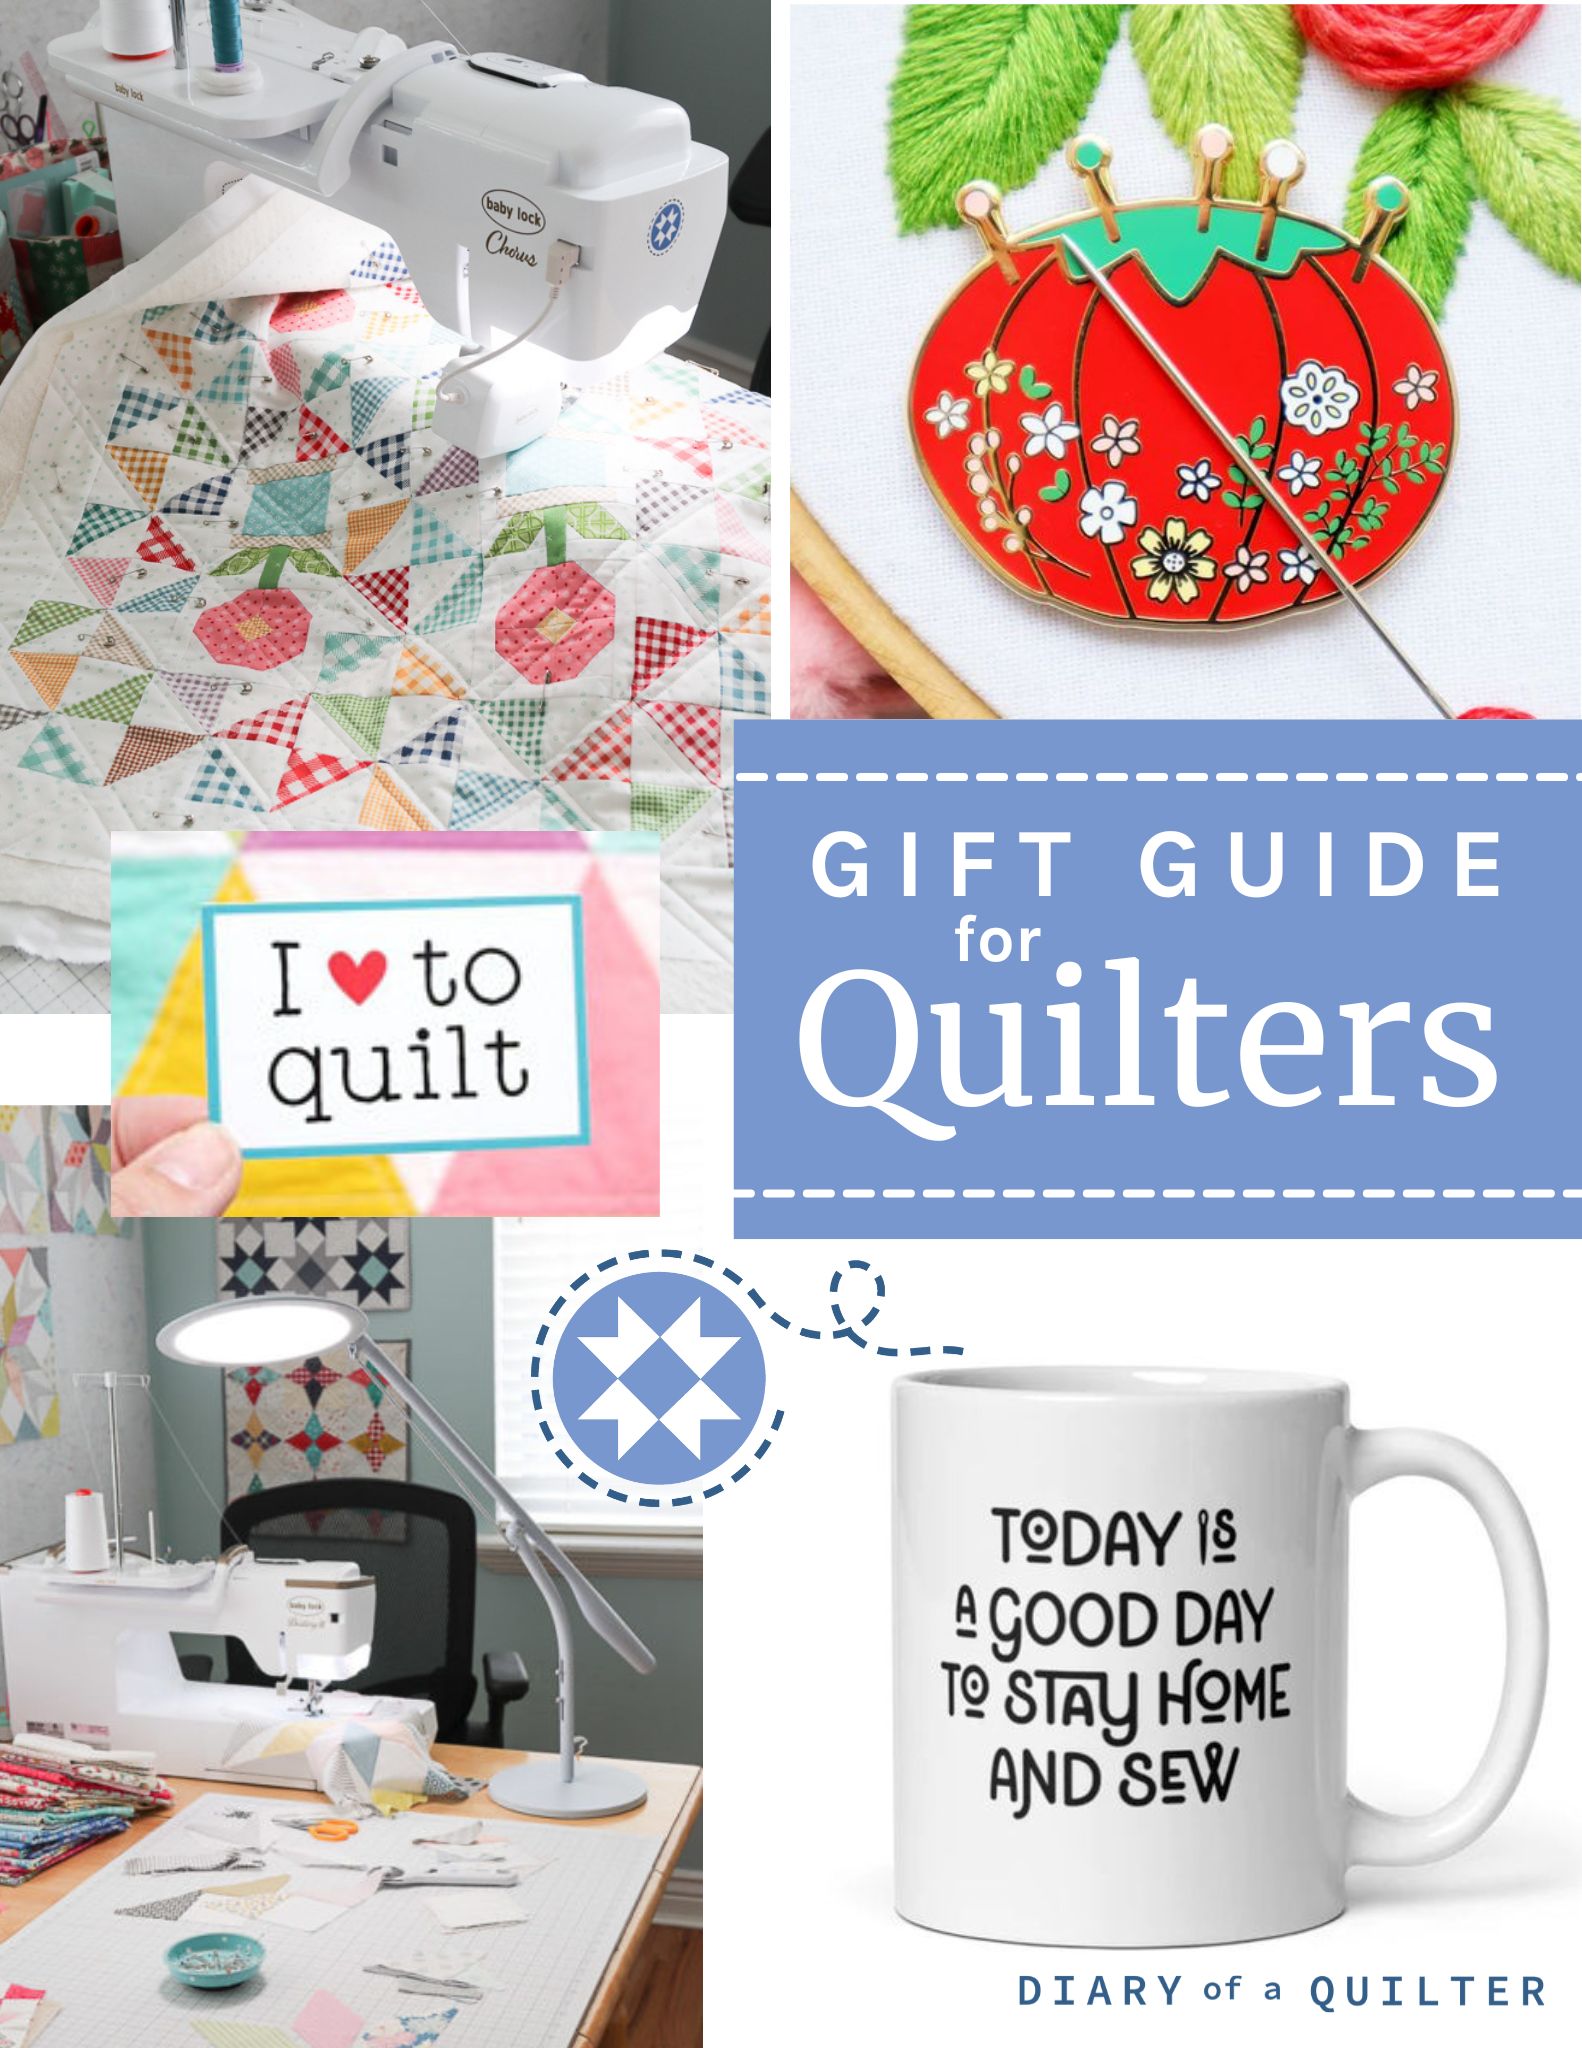 Gift Guide for Quilters - Diary of a Quilter - a quilt blog